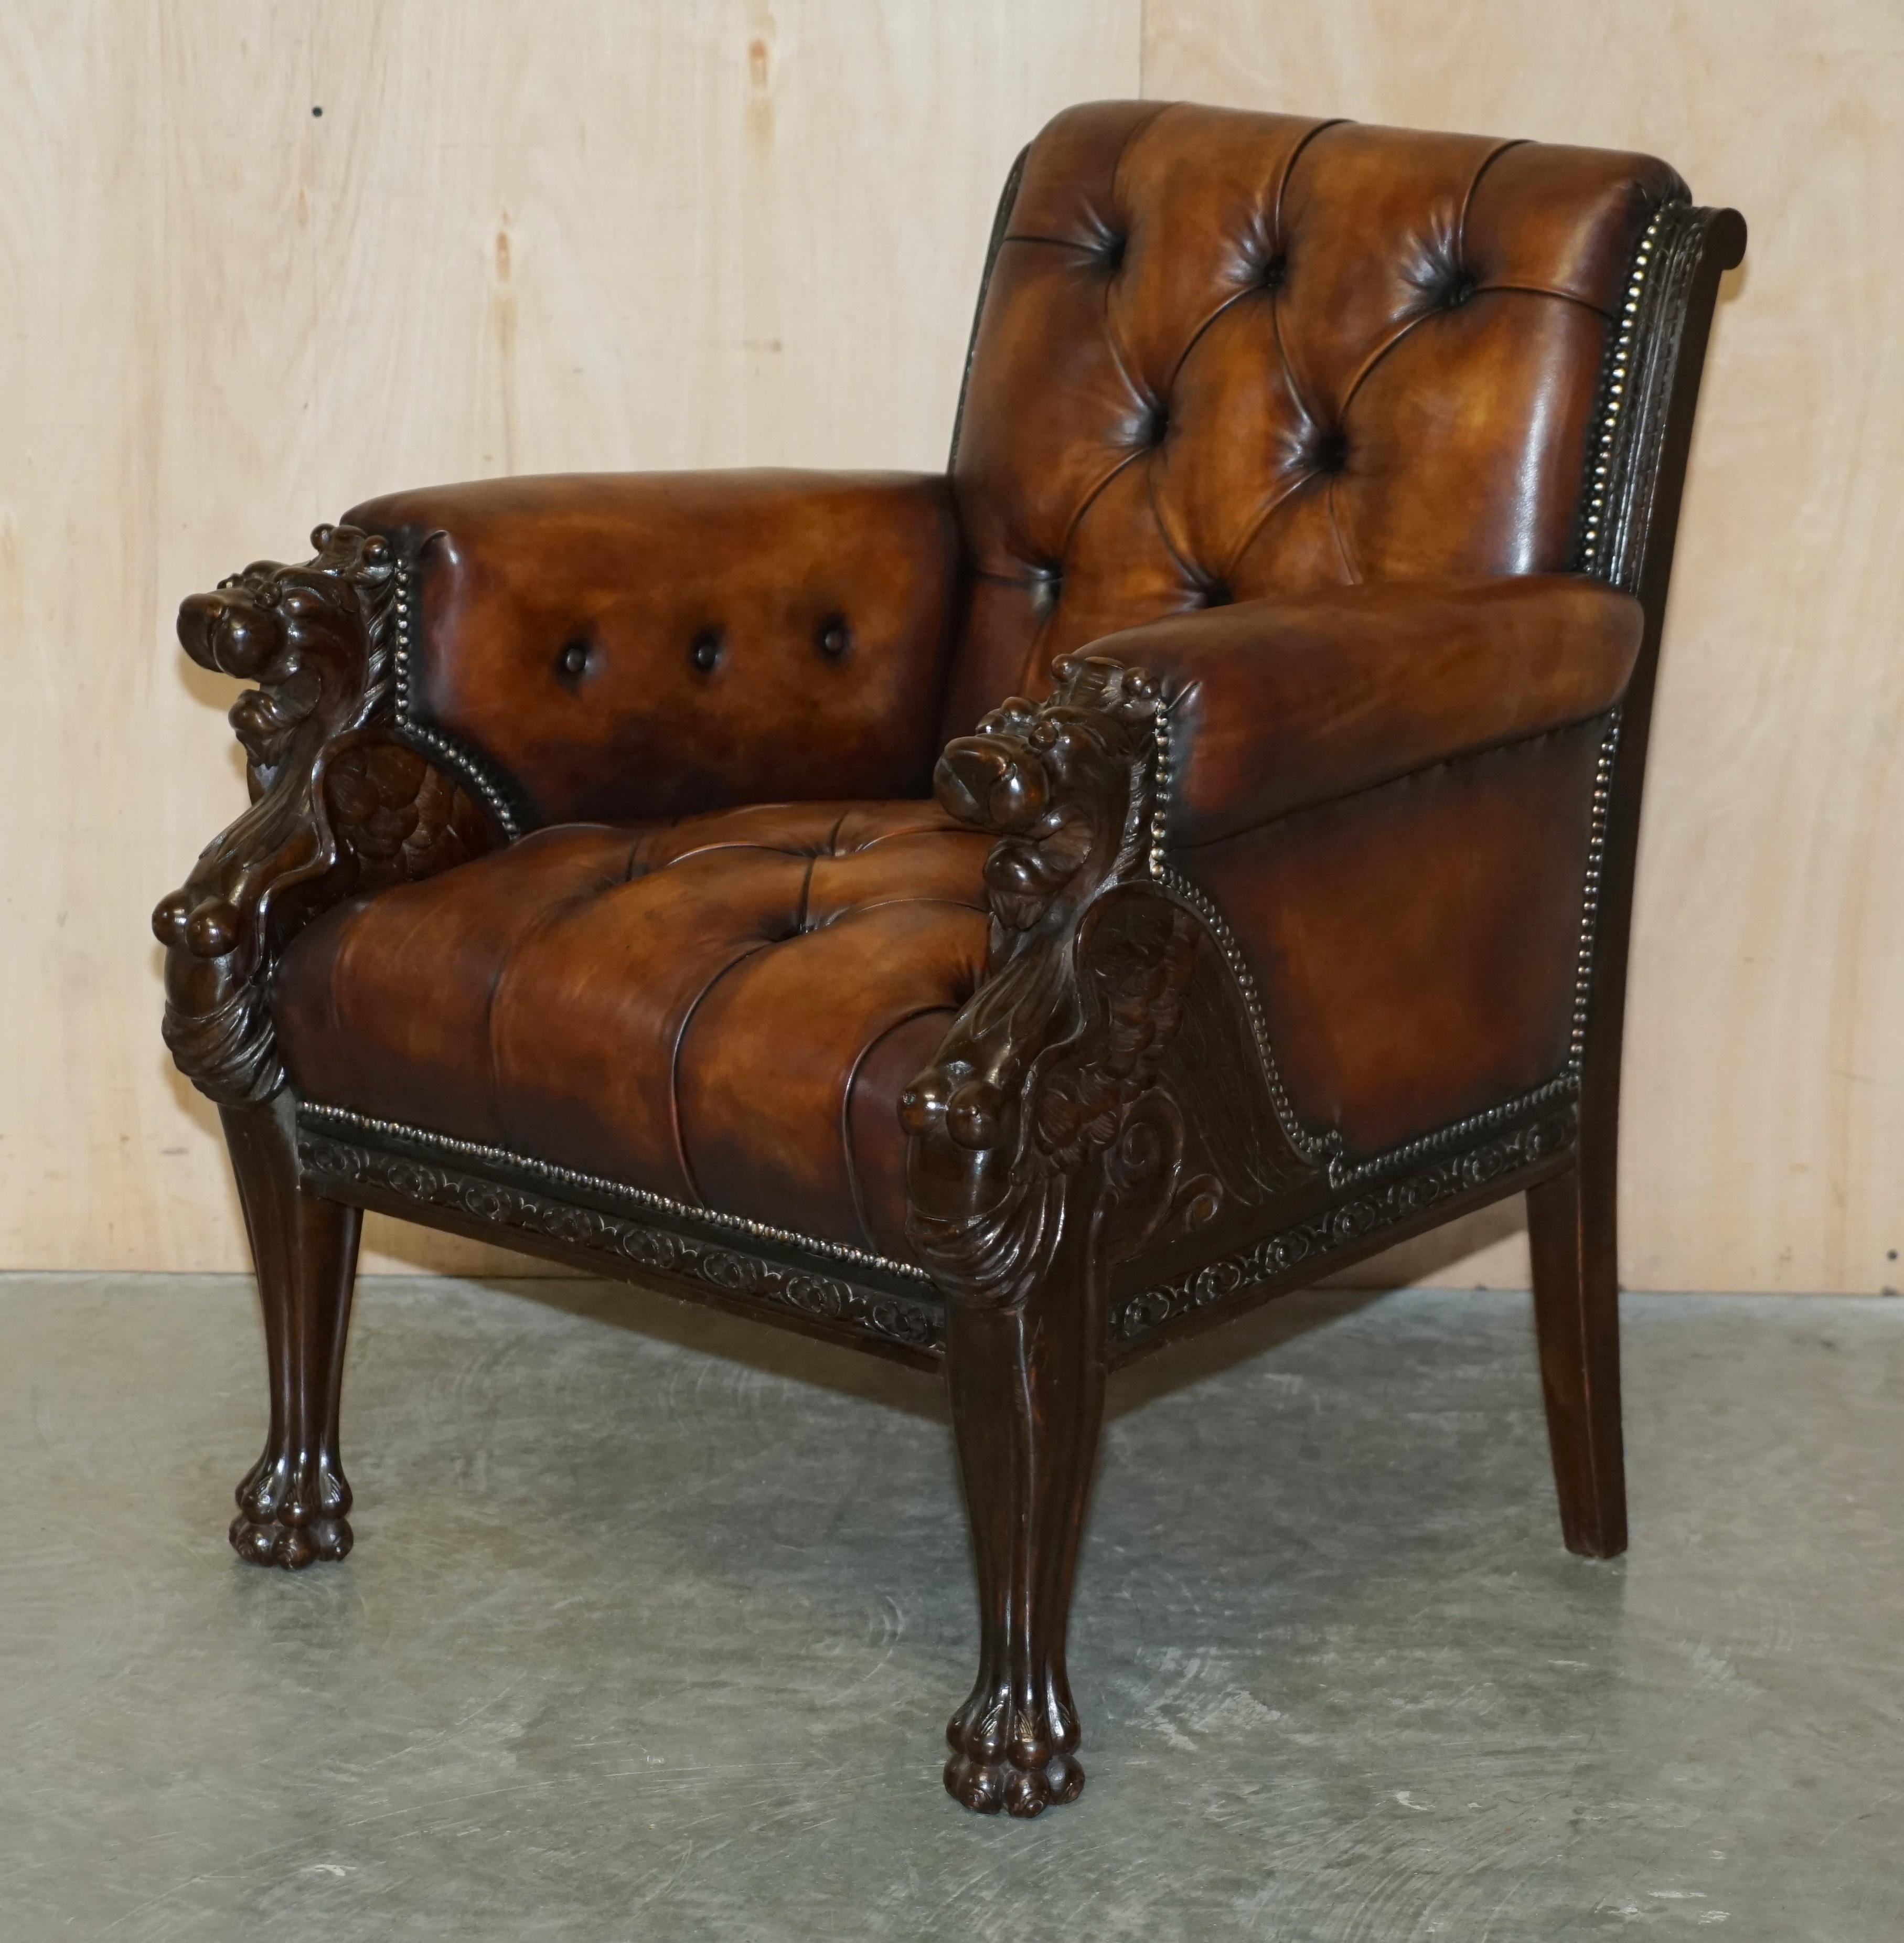 RESTORED ANTIQUE LiON HAND CARVED BROWN LEATHER CHESTERFIELD SOFA ARMCHAIR SUITE im Angebot 7